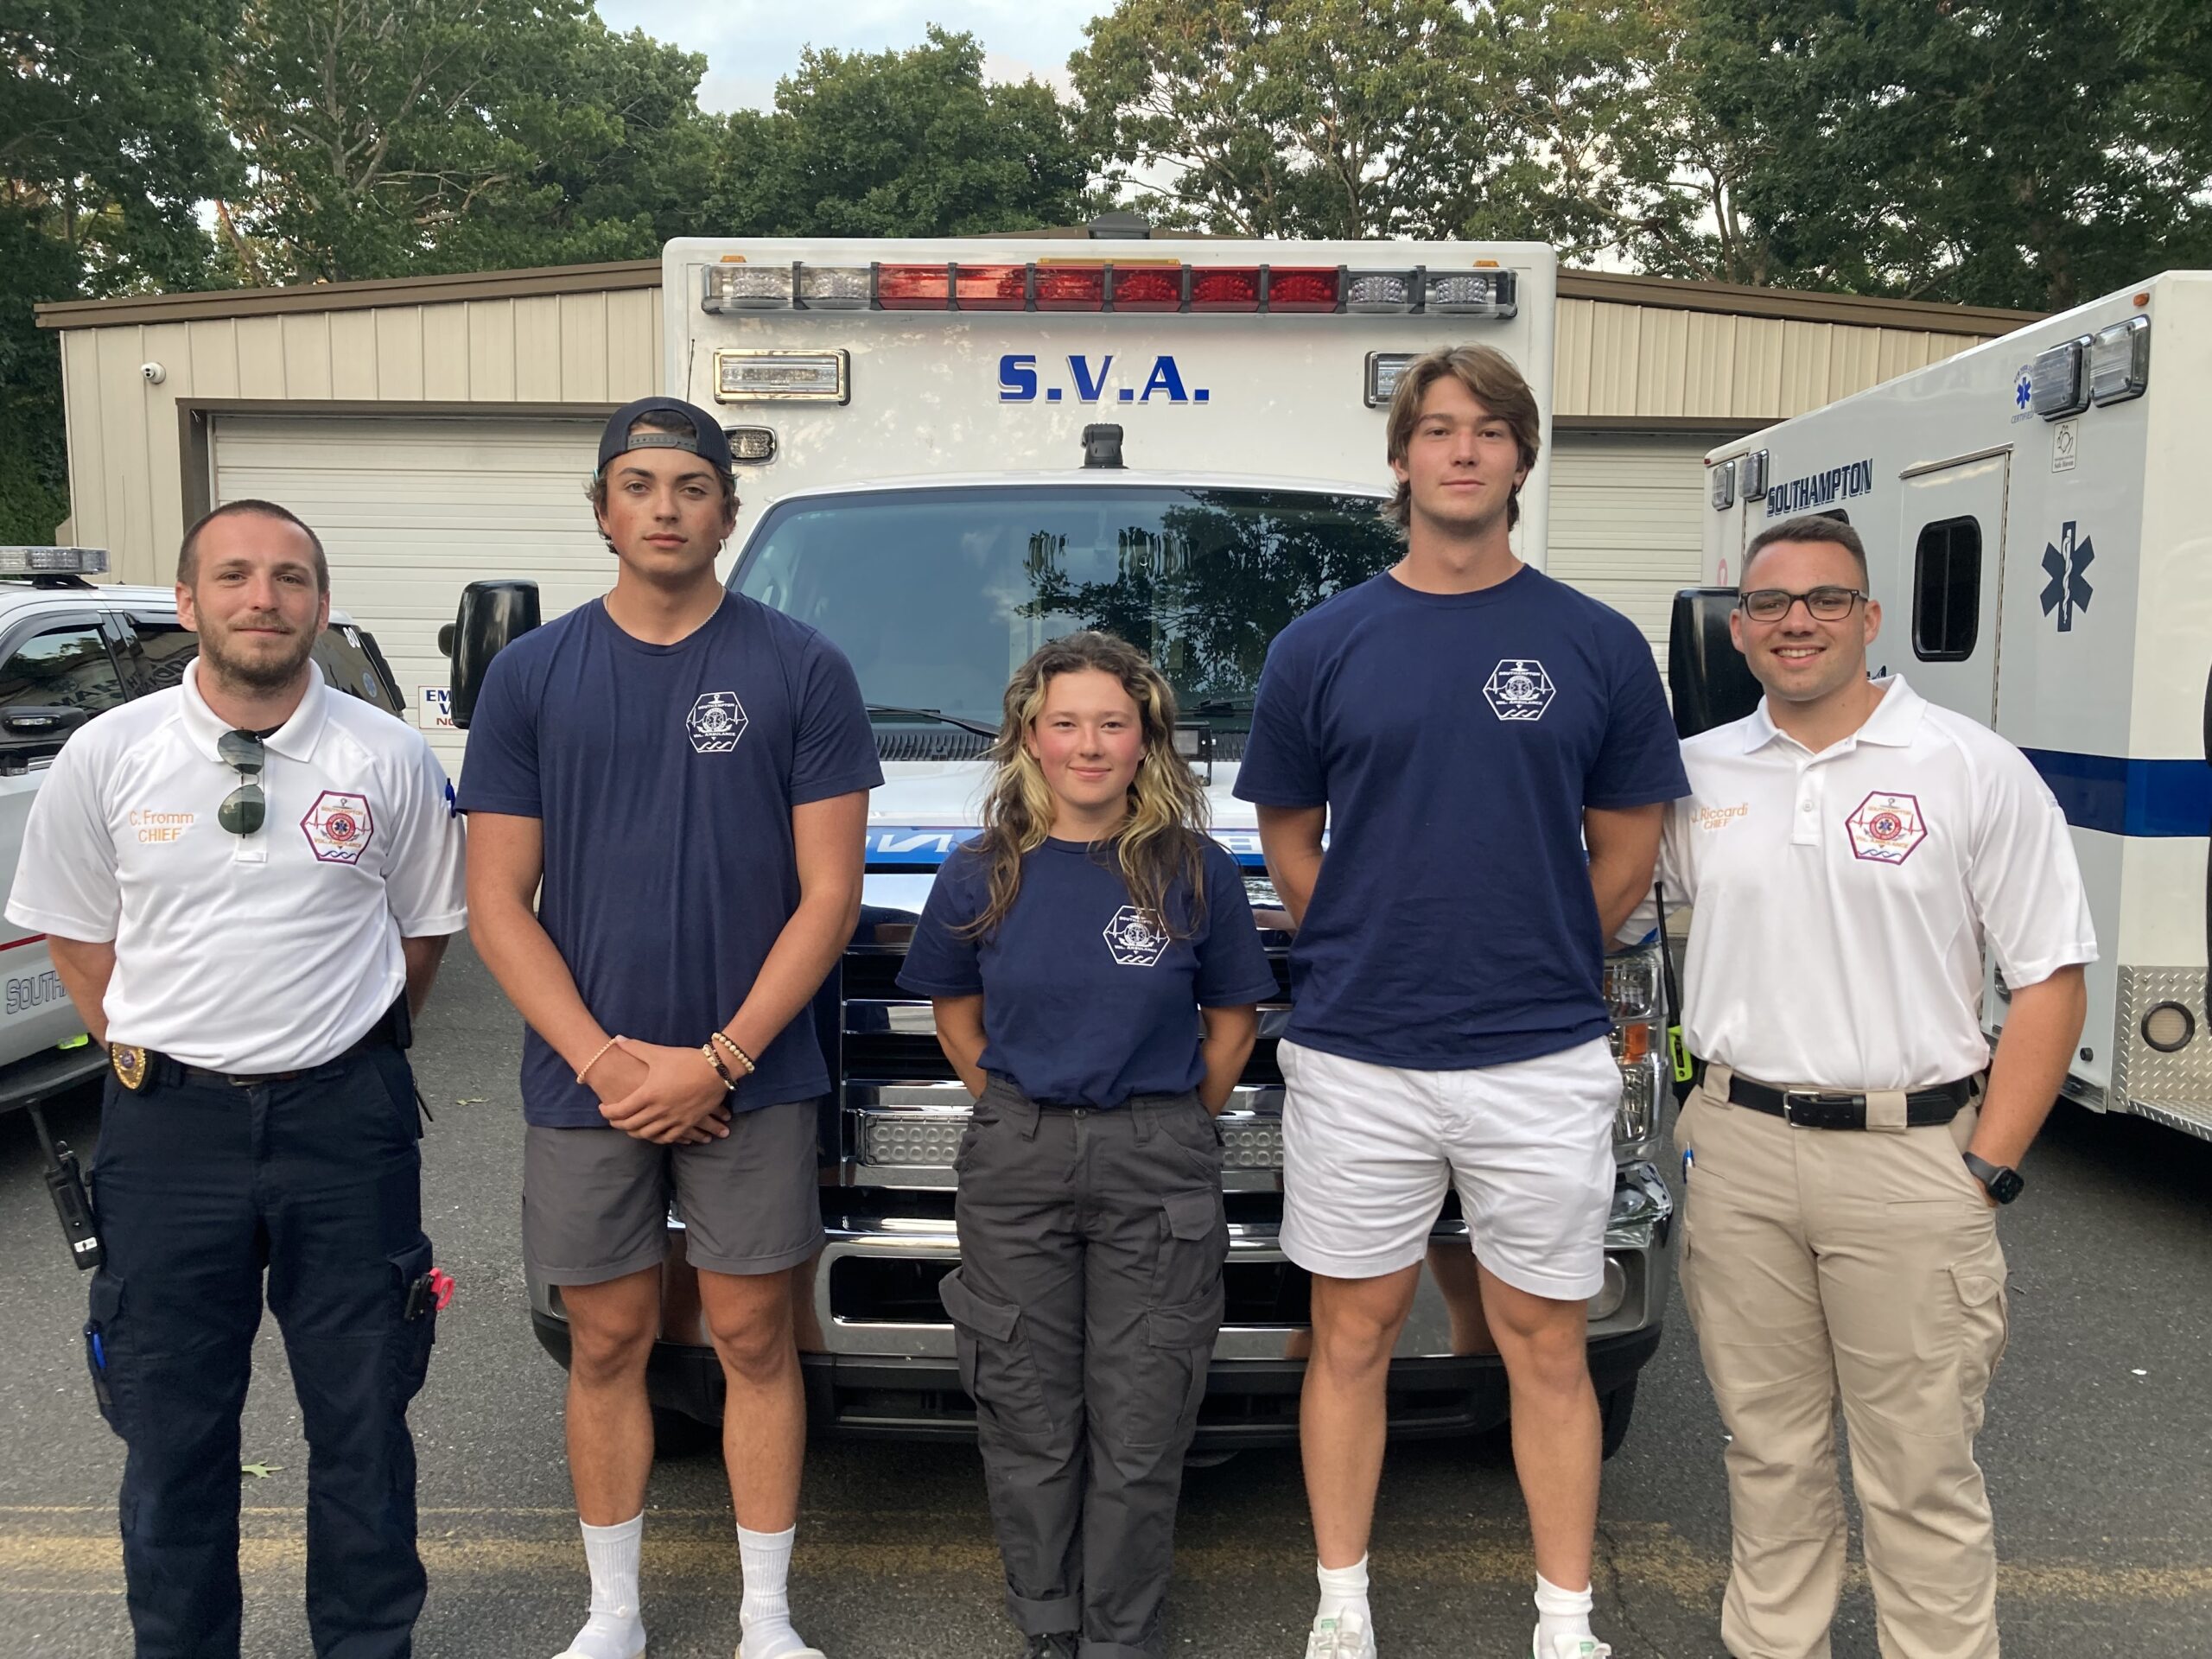 Southampton Volunteer Ambulance Chiefs and Membership send off some of their college bound members with thanks and good luck at a recent department meeting. From left, 2nd Asst. Chief Corey Hanning-Fromm, student members Scott Healey, Chloe Phillips, Schuyler Bacon, and 1st Asst. Chief Joseph Riccardi Jr. COURTESY JIMMY  MACK